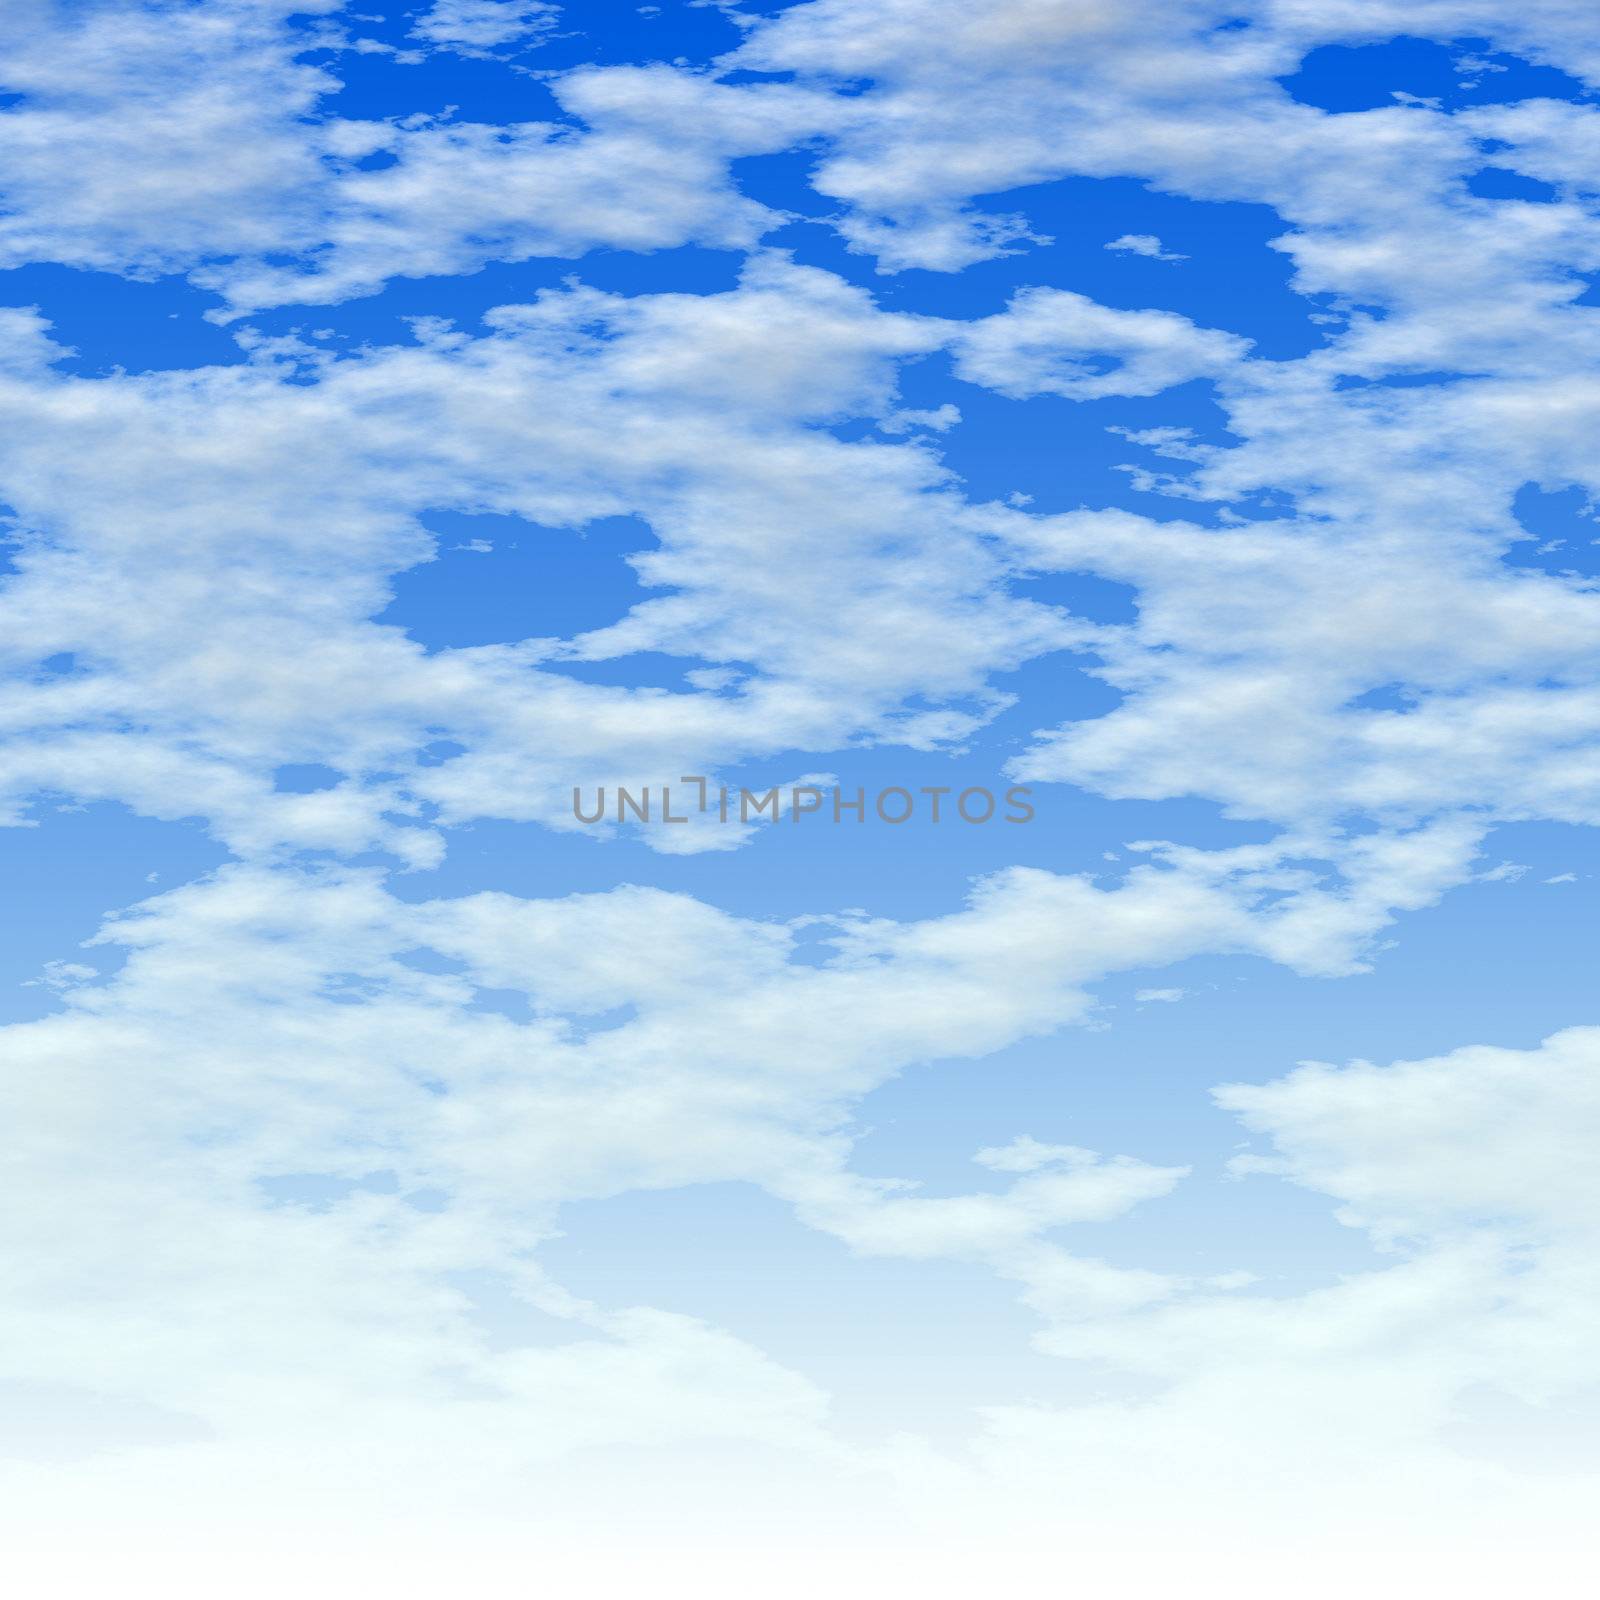 Here is a simple clouds background - it fades to white at the bottom.  This tiles seamlessly from side to side.